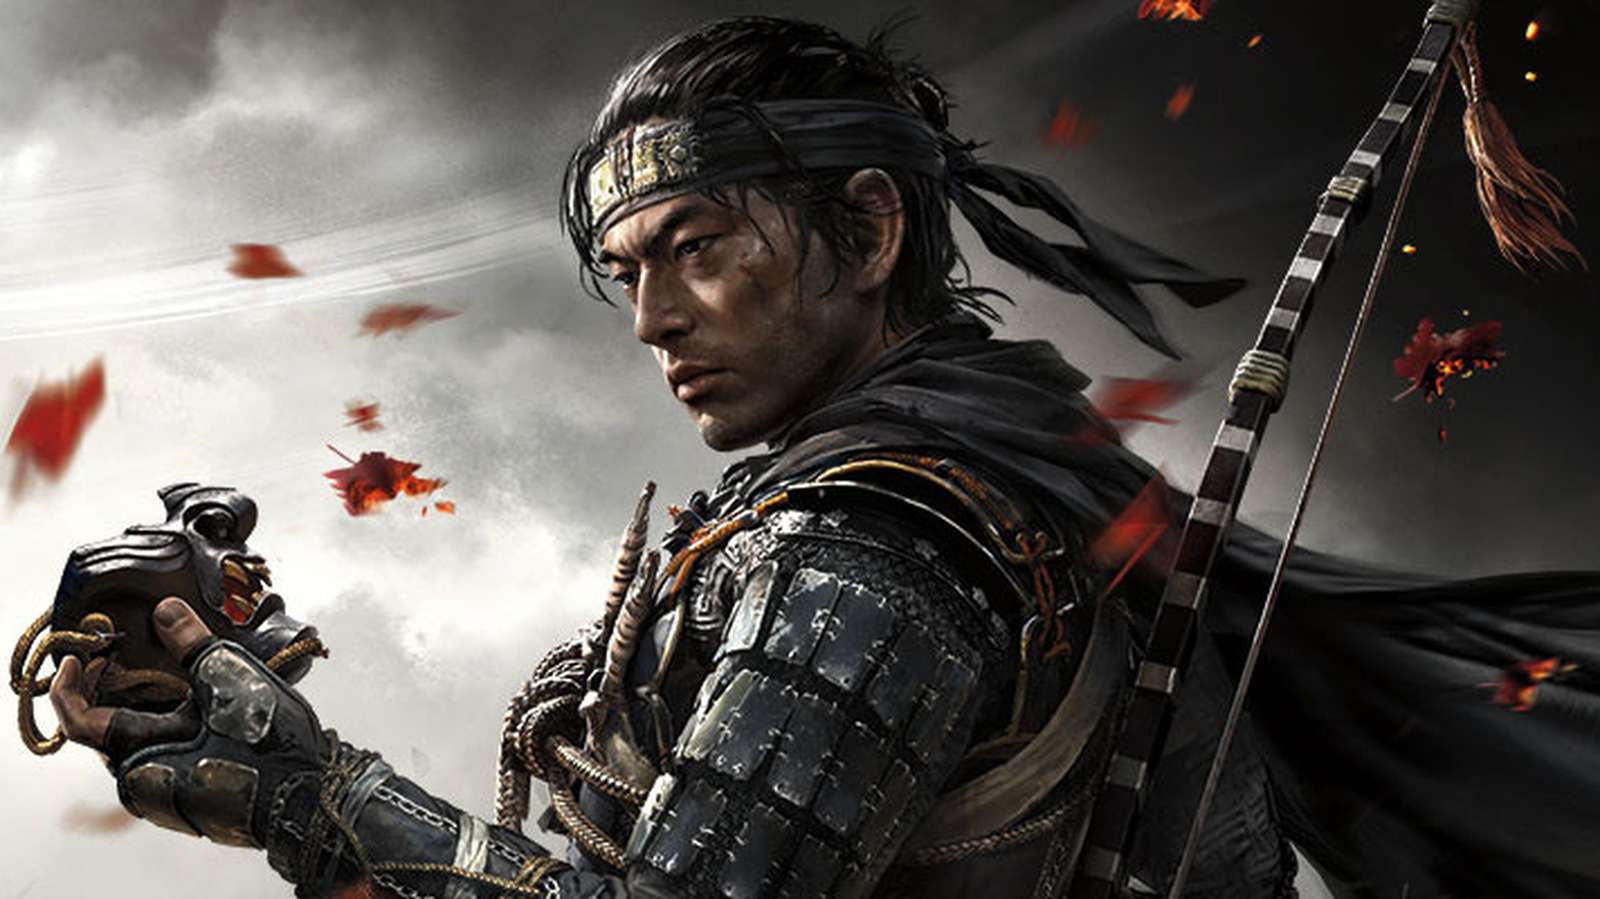 Sucker Punch seems to be working on Ghost of Tsushima 2